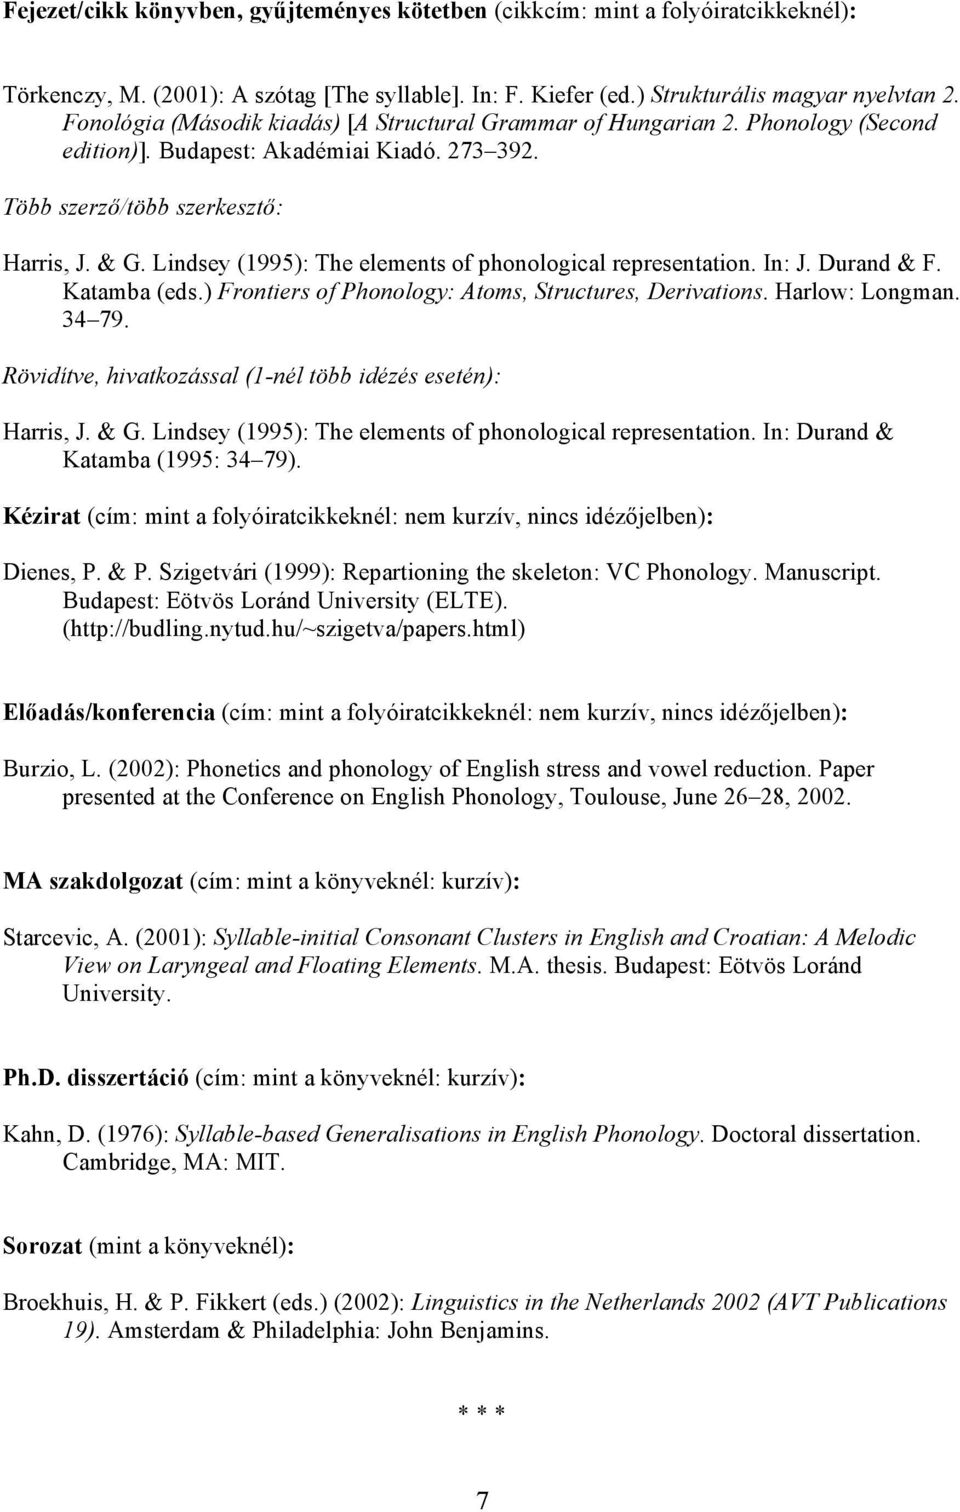 Lindsey (1995): The elements of phonological representation. In: J. Durand & F. Katamba (eds.) Frontiers of Phonology: Atoms, Structures, Derivations. Harlow: Longman. 34 79.